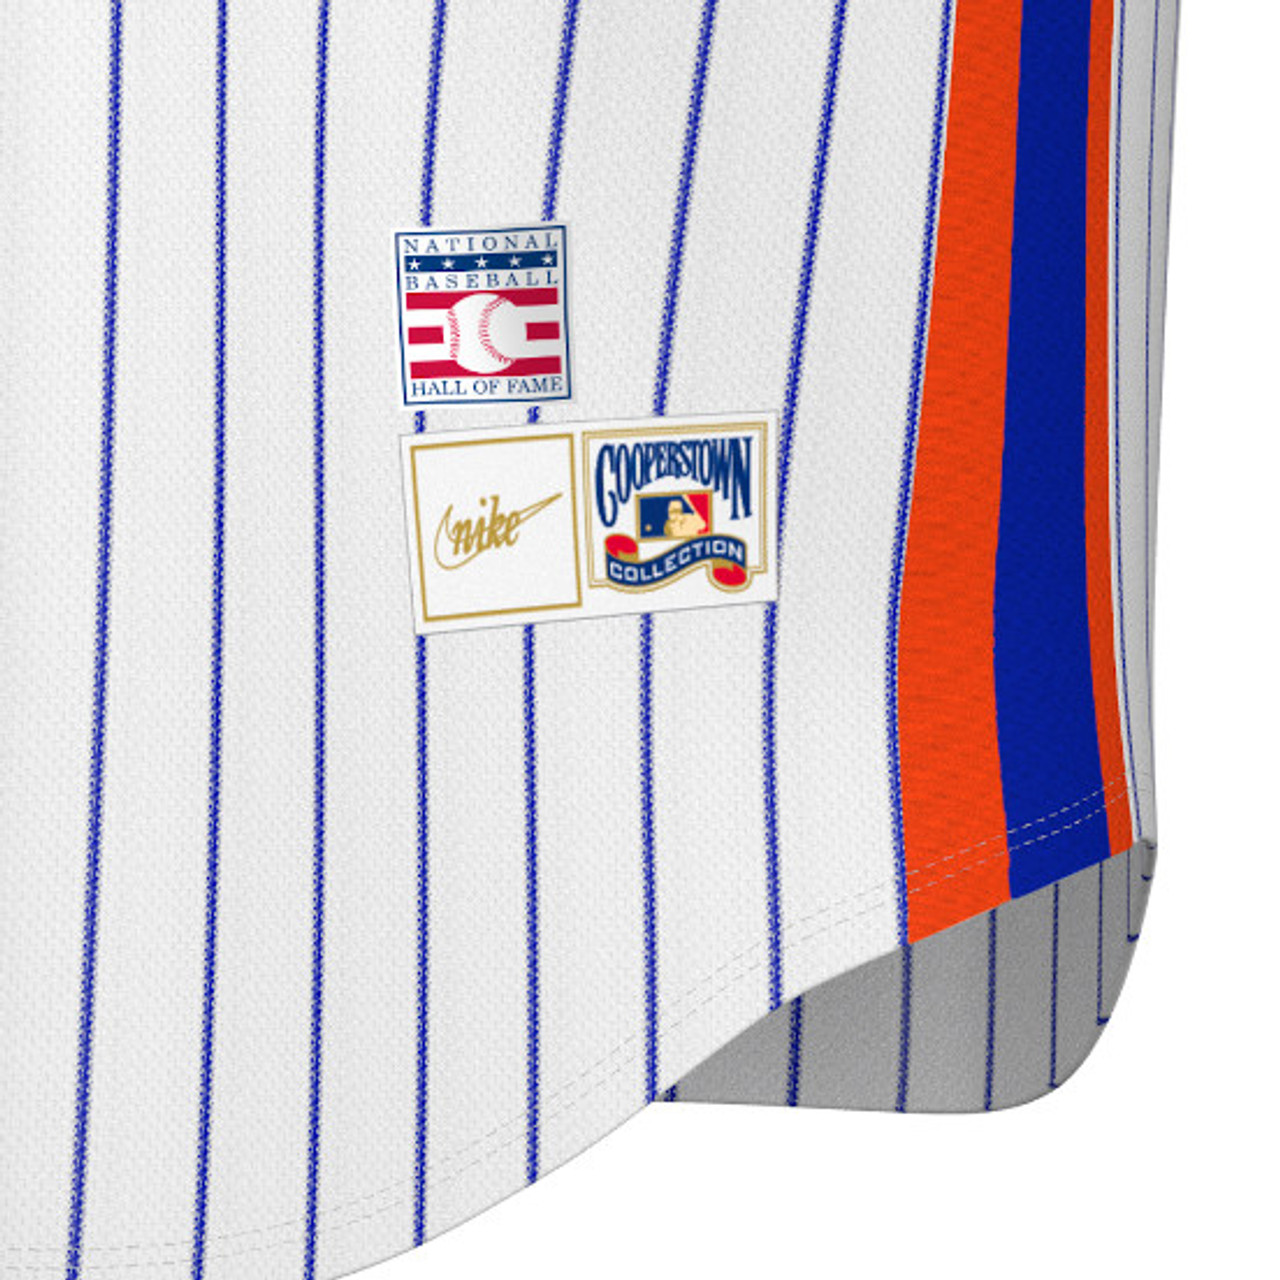 Tom Seaver New York Mets Mitchell & Ness Cooperstown Collection Authentic  Jersey - Cream